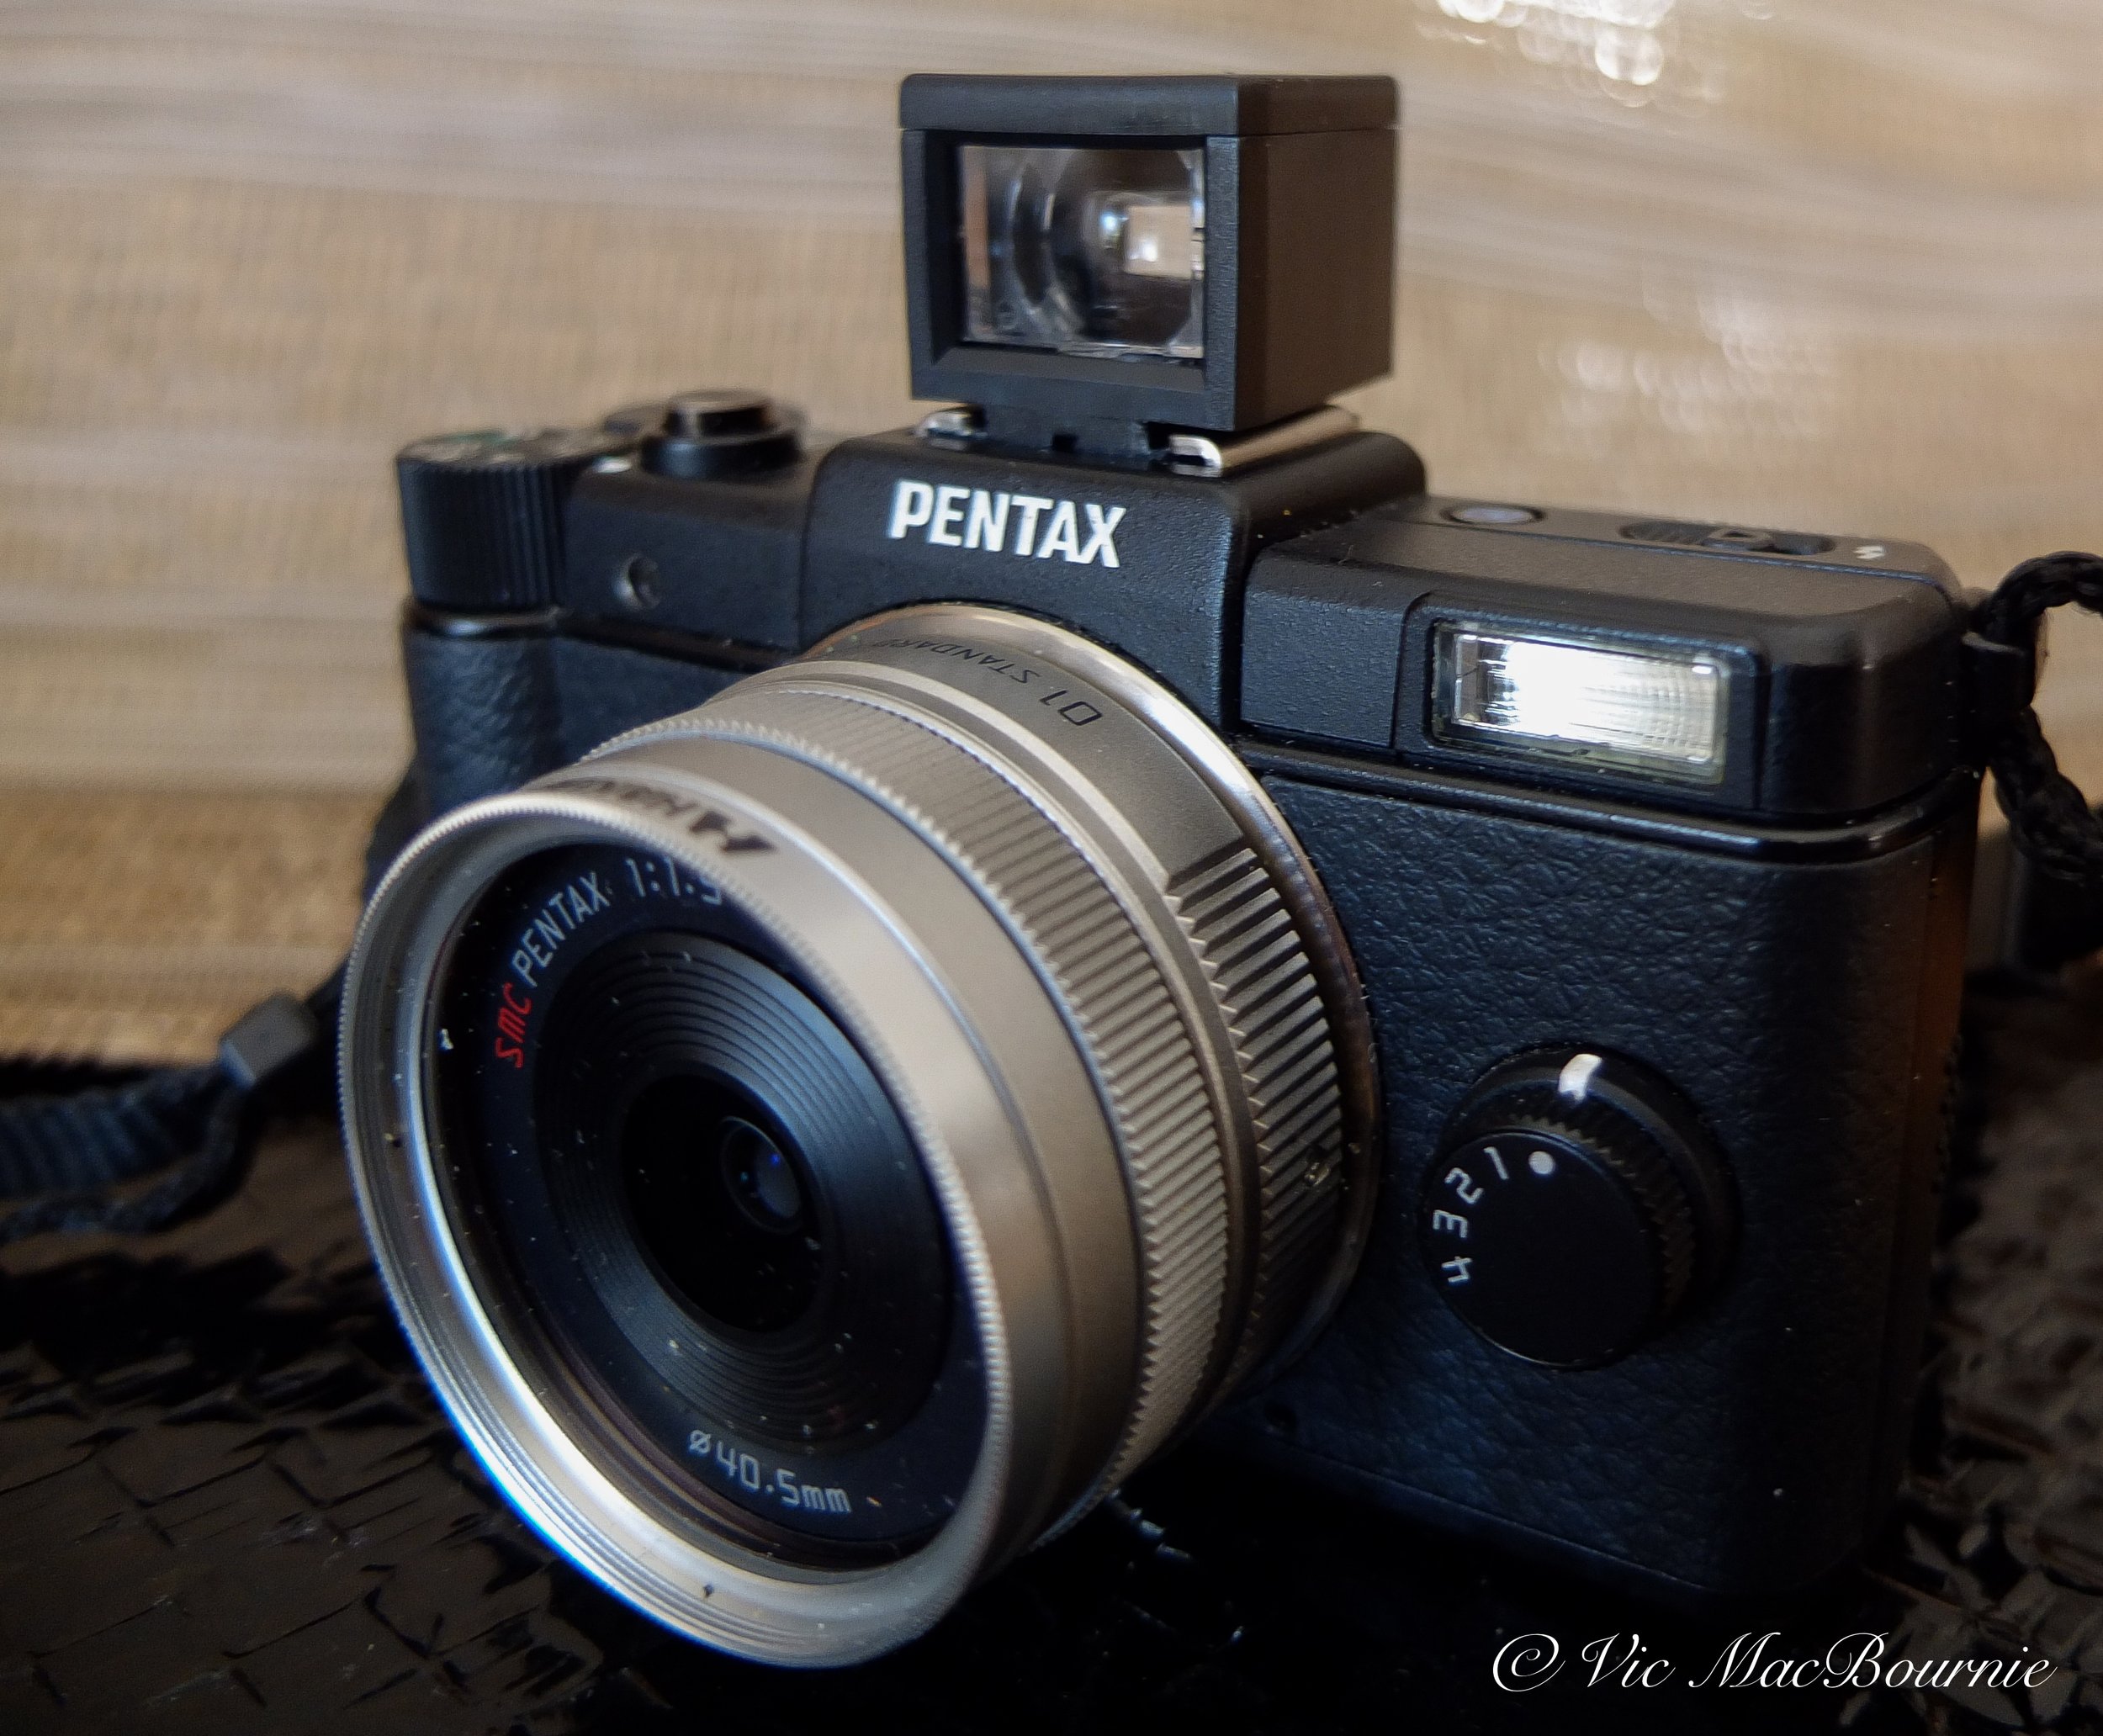 The tiny Lichifit 28mm external viewfinder works well on the Pentax Q.